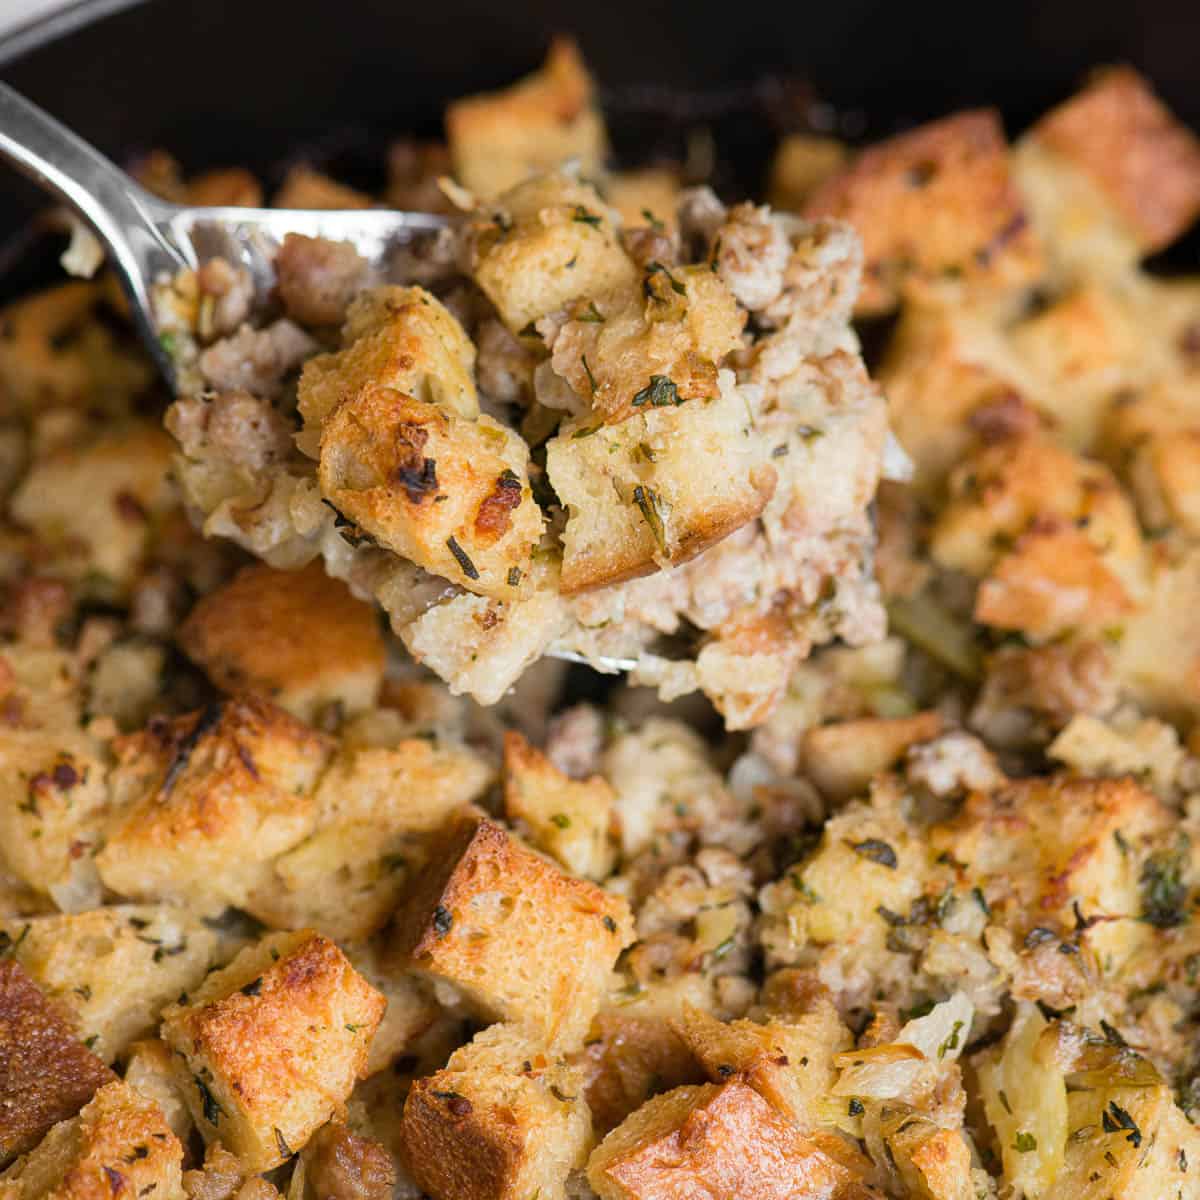 https://selfproclaimedfoodie.com/wp-content/uploads/sausage-stuffing-square-1.jpg